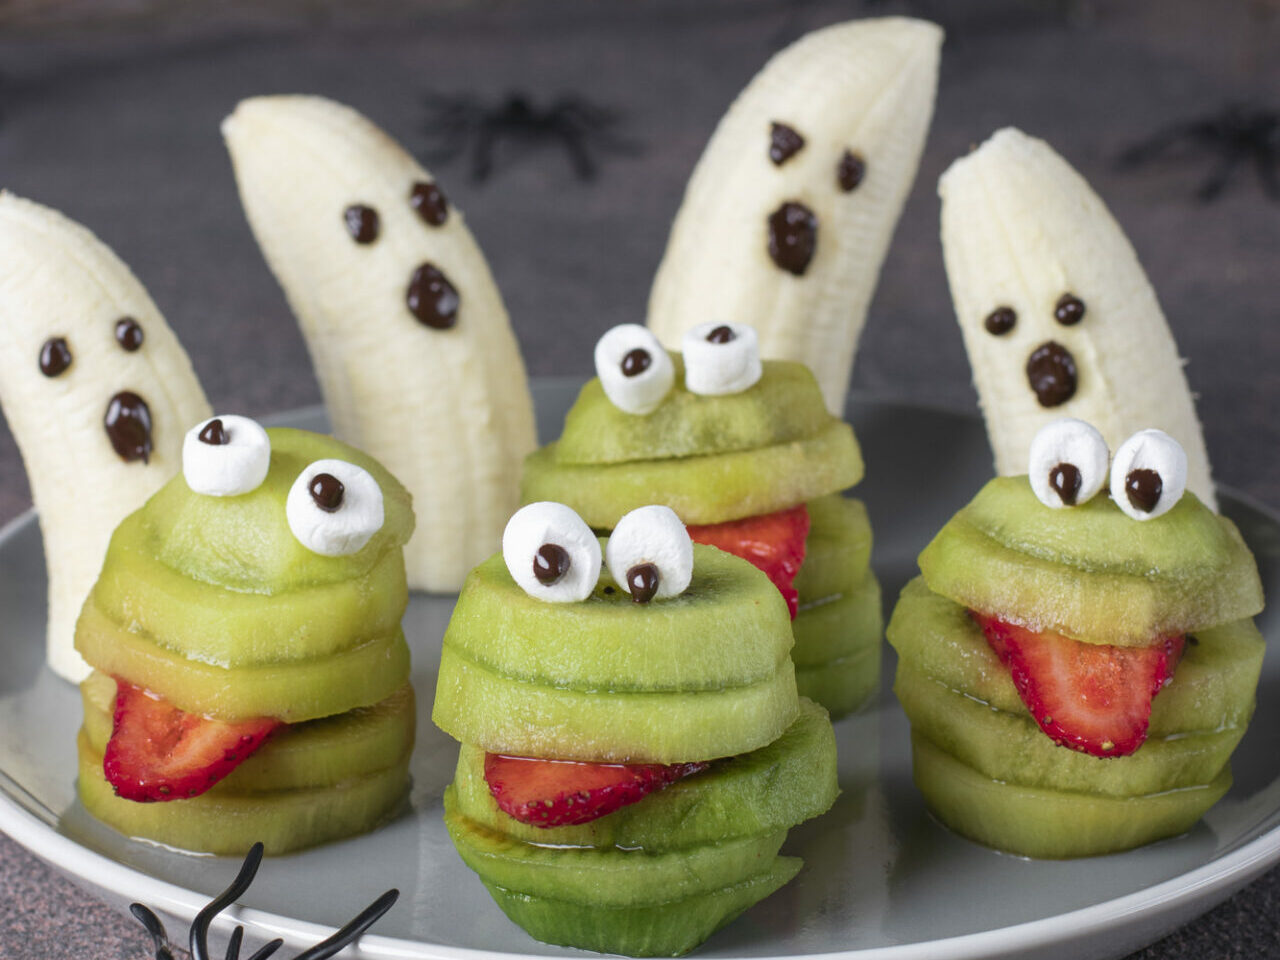 kiwis cut to look like creatures with a strawberry slice tongue, and bananas with little faces to look like ghosts